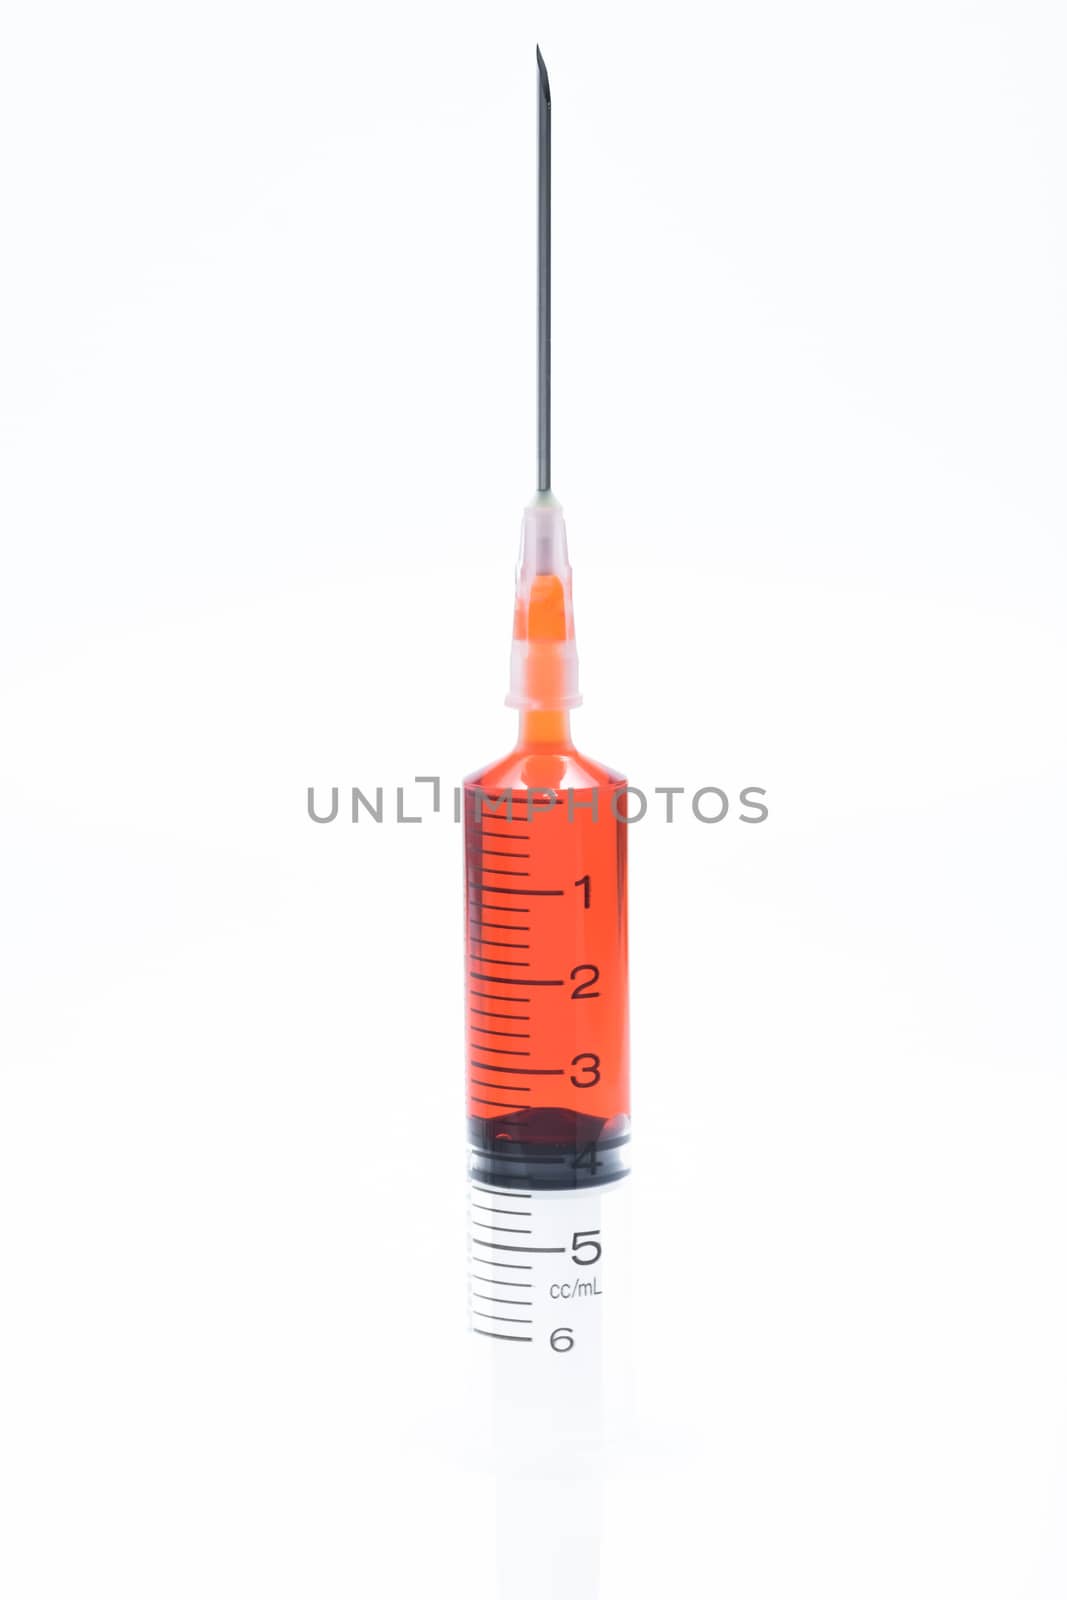 red vaccine syringe by zneb076